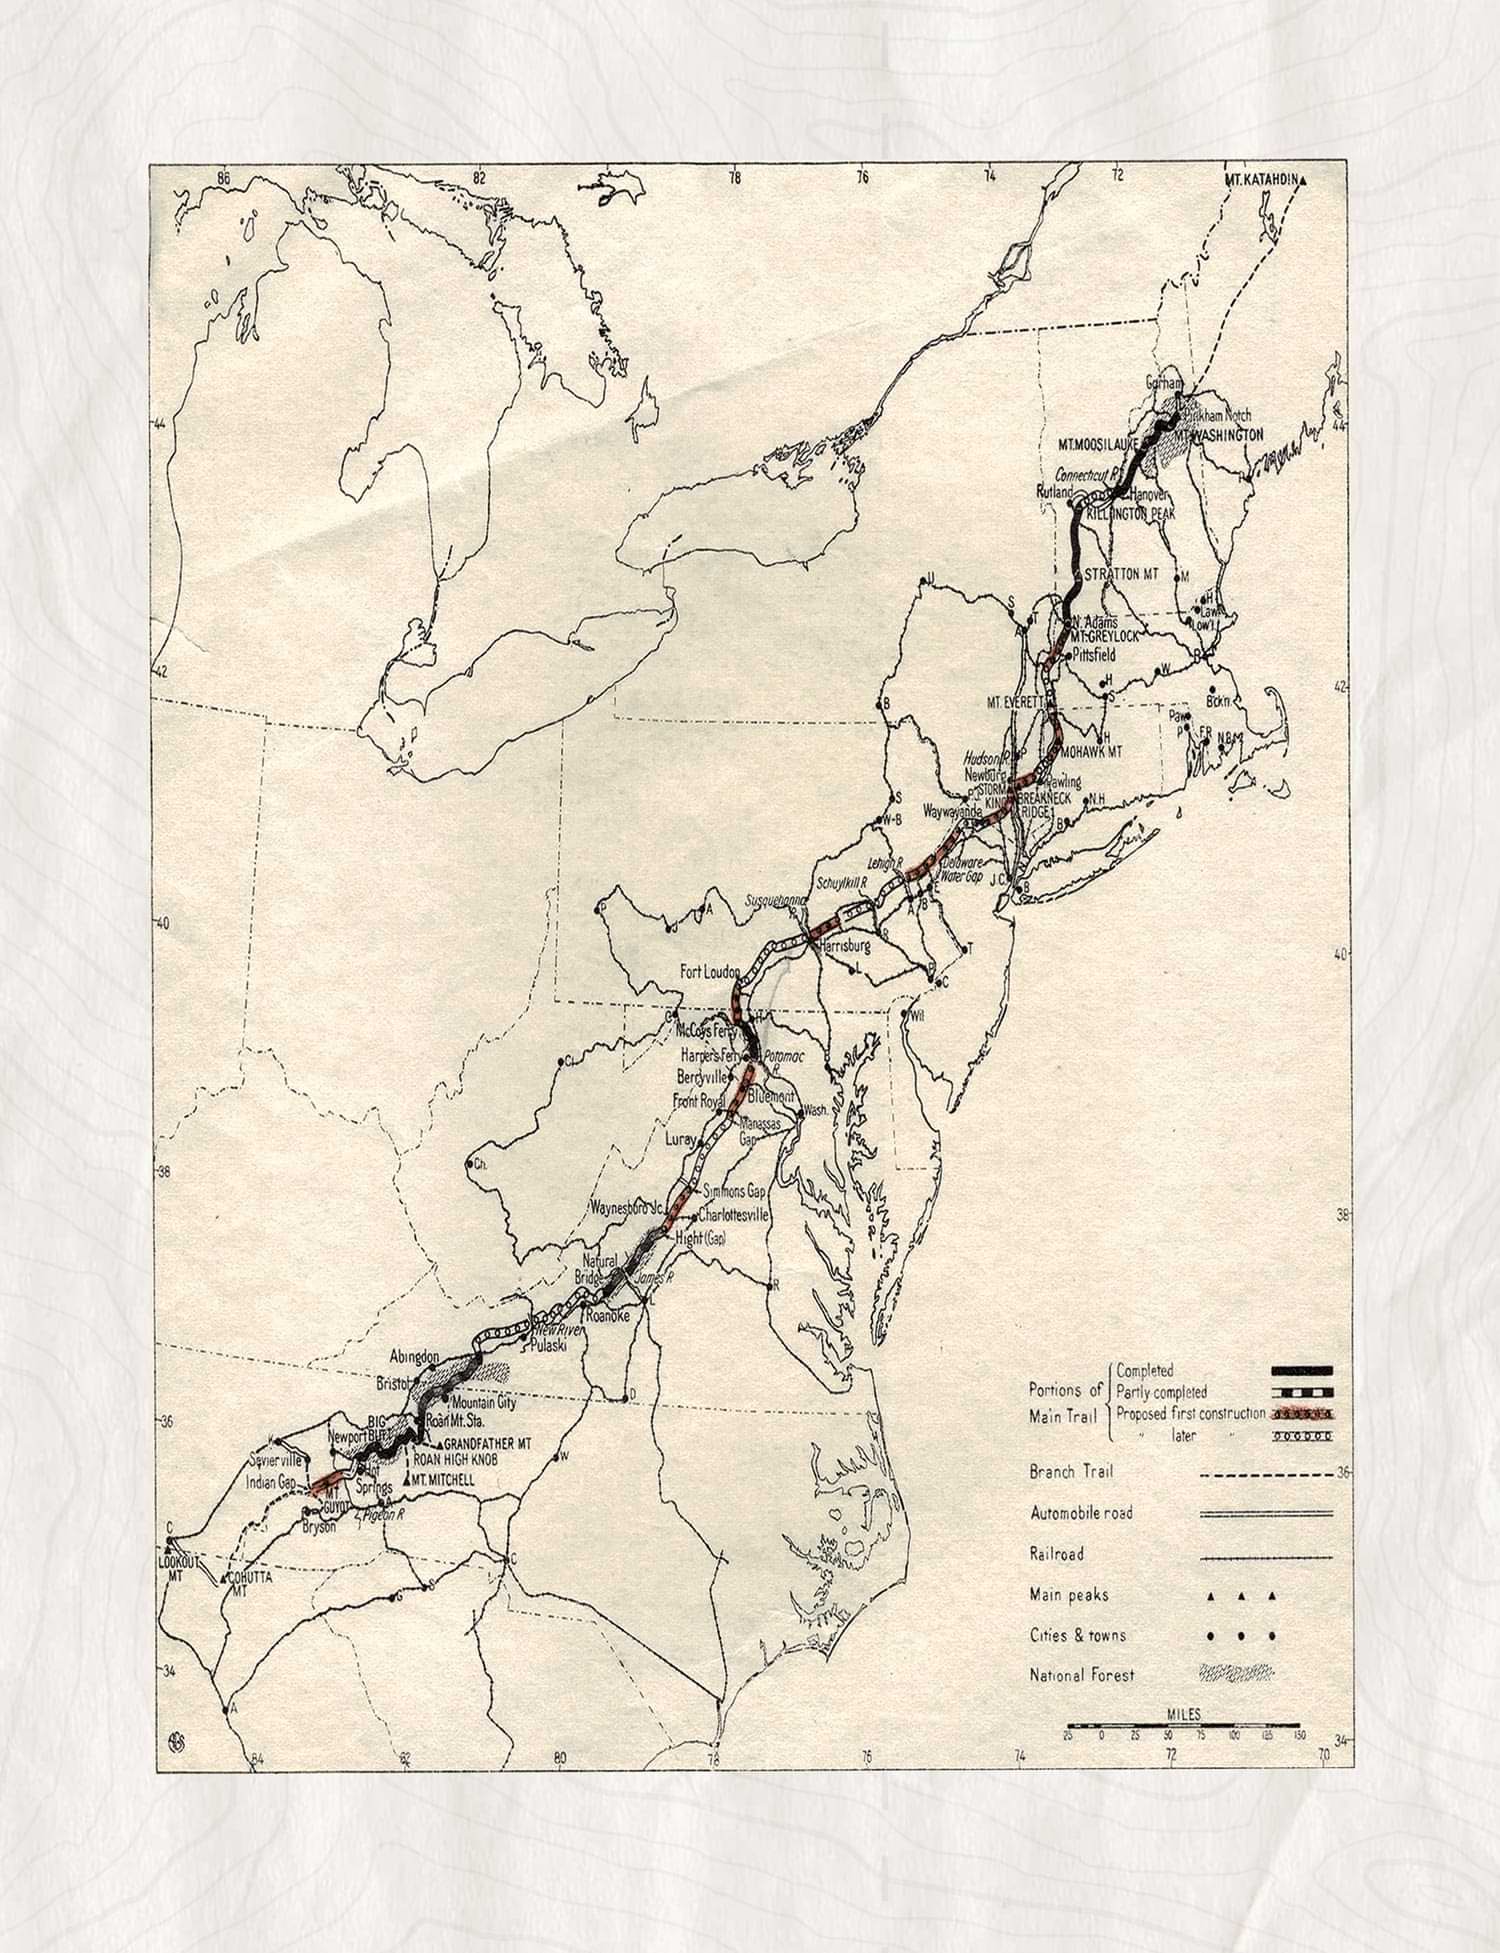 A map of the proposed Appalachian trail by Benton MacKaye, believed to date to 1922